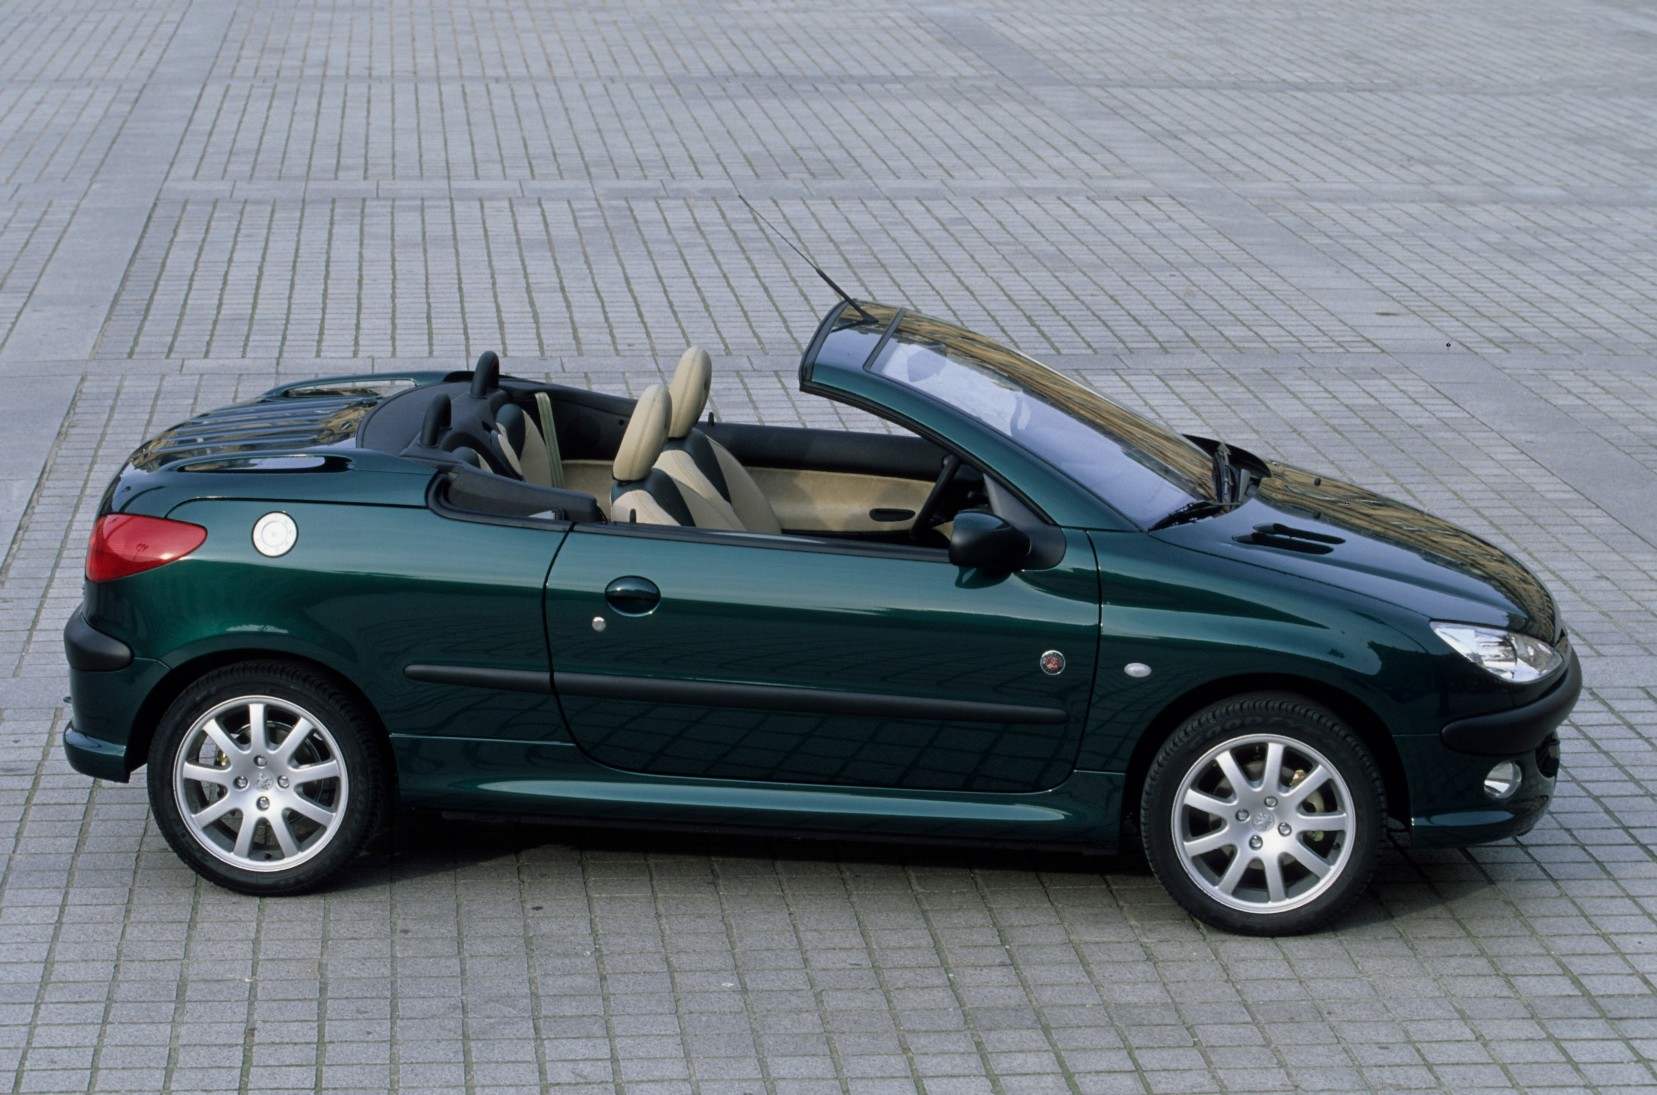 Coupe-cabriolet PEUGEOT 206СС removed the roof